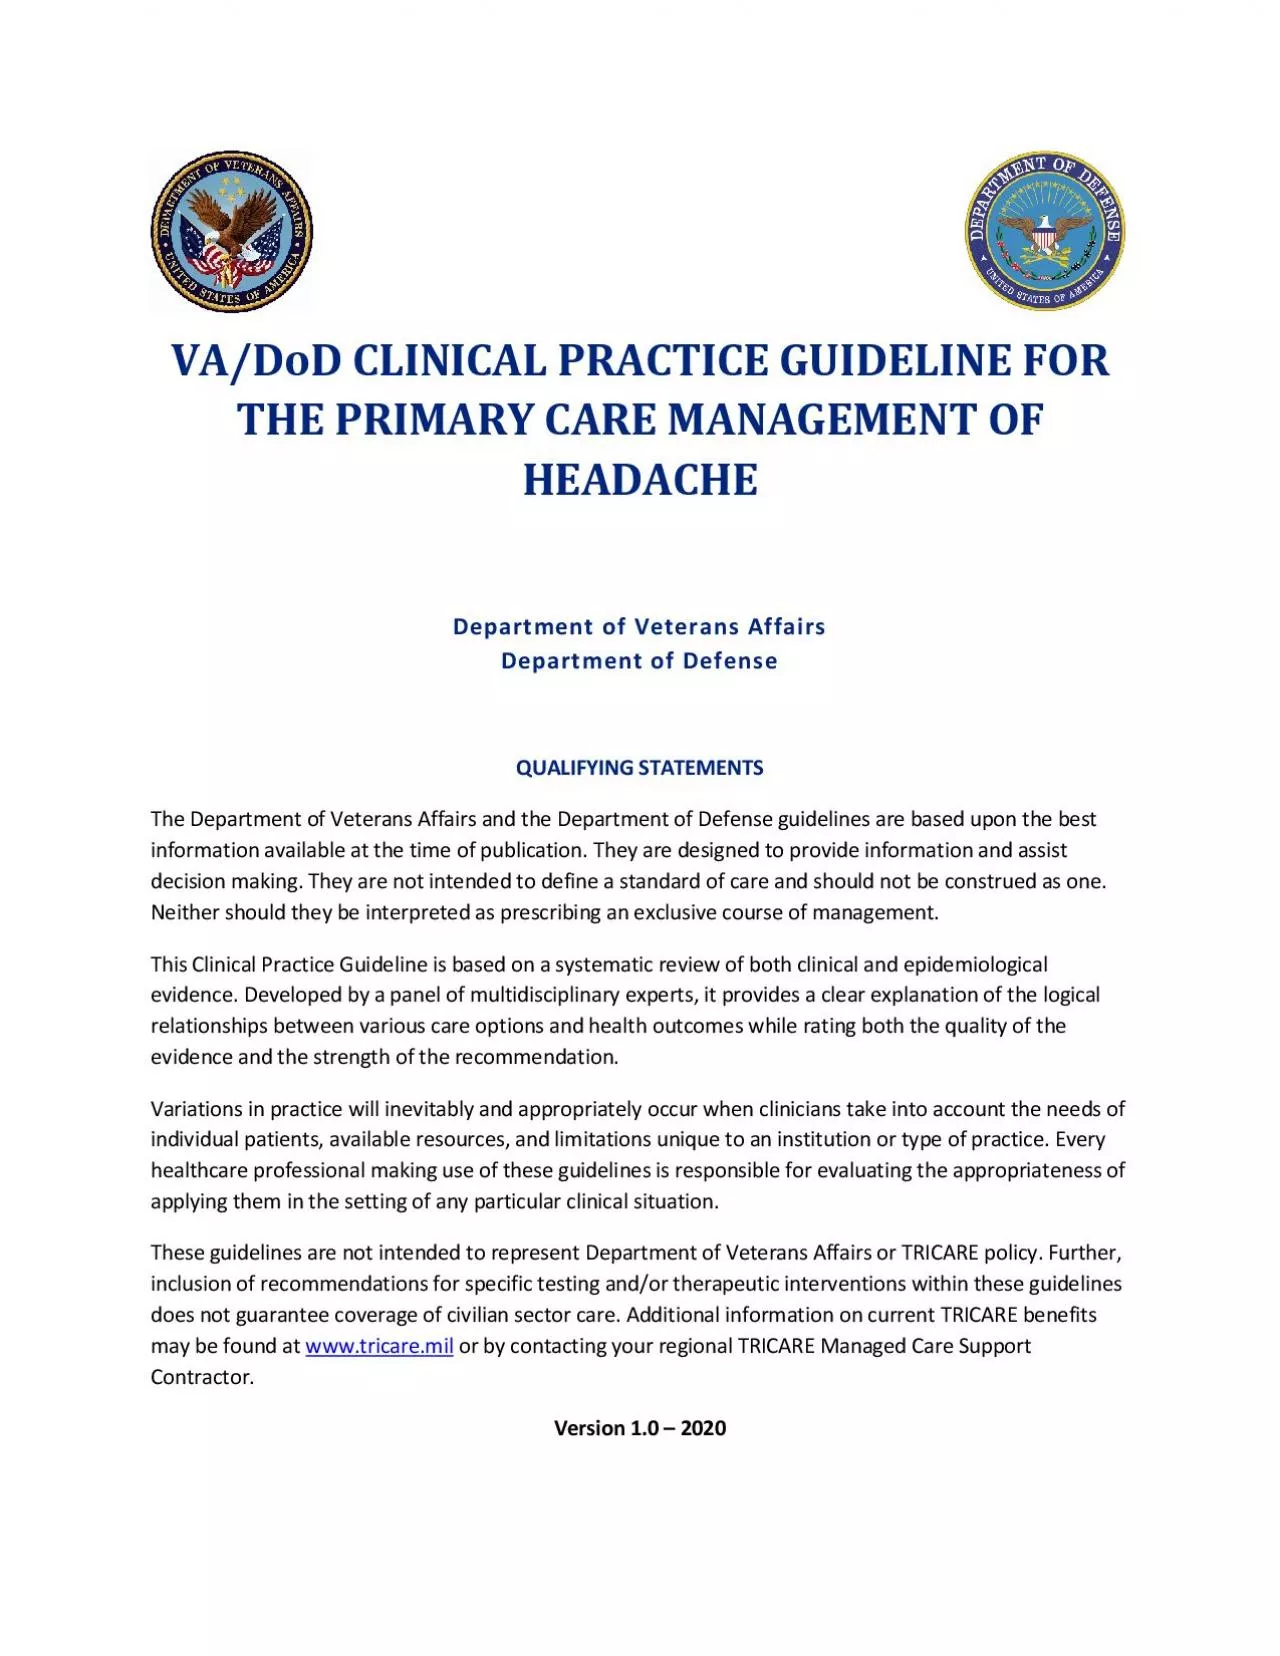 D CLINICAL PRACTICE GUIDELINE FOR THEPRIMARY CAREMANAGEMENT OF HEADACH